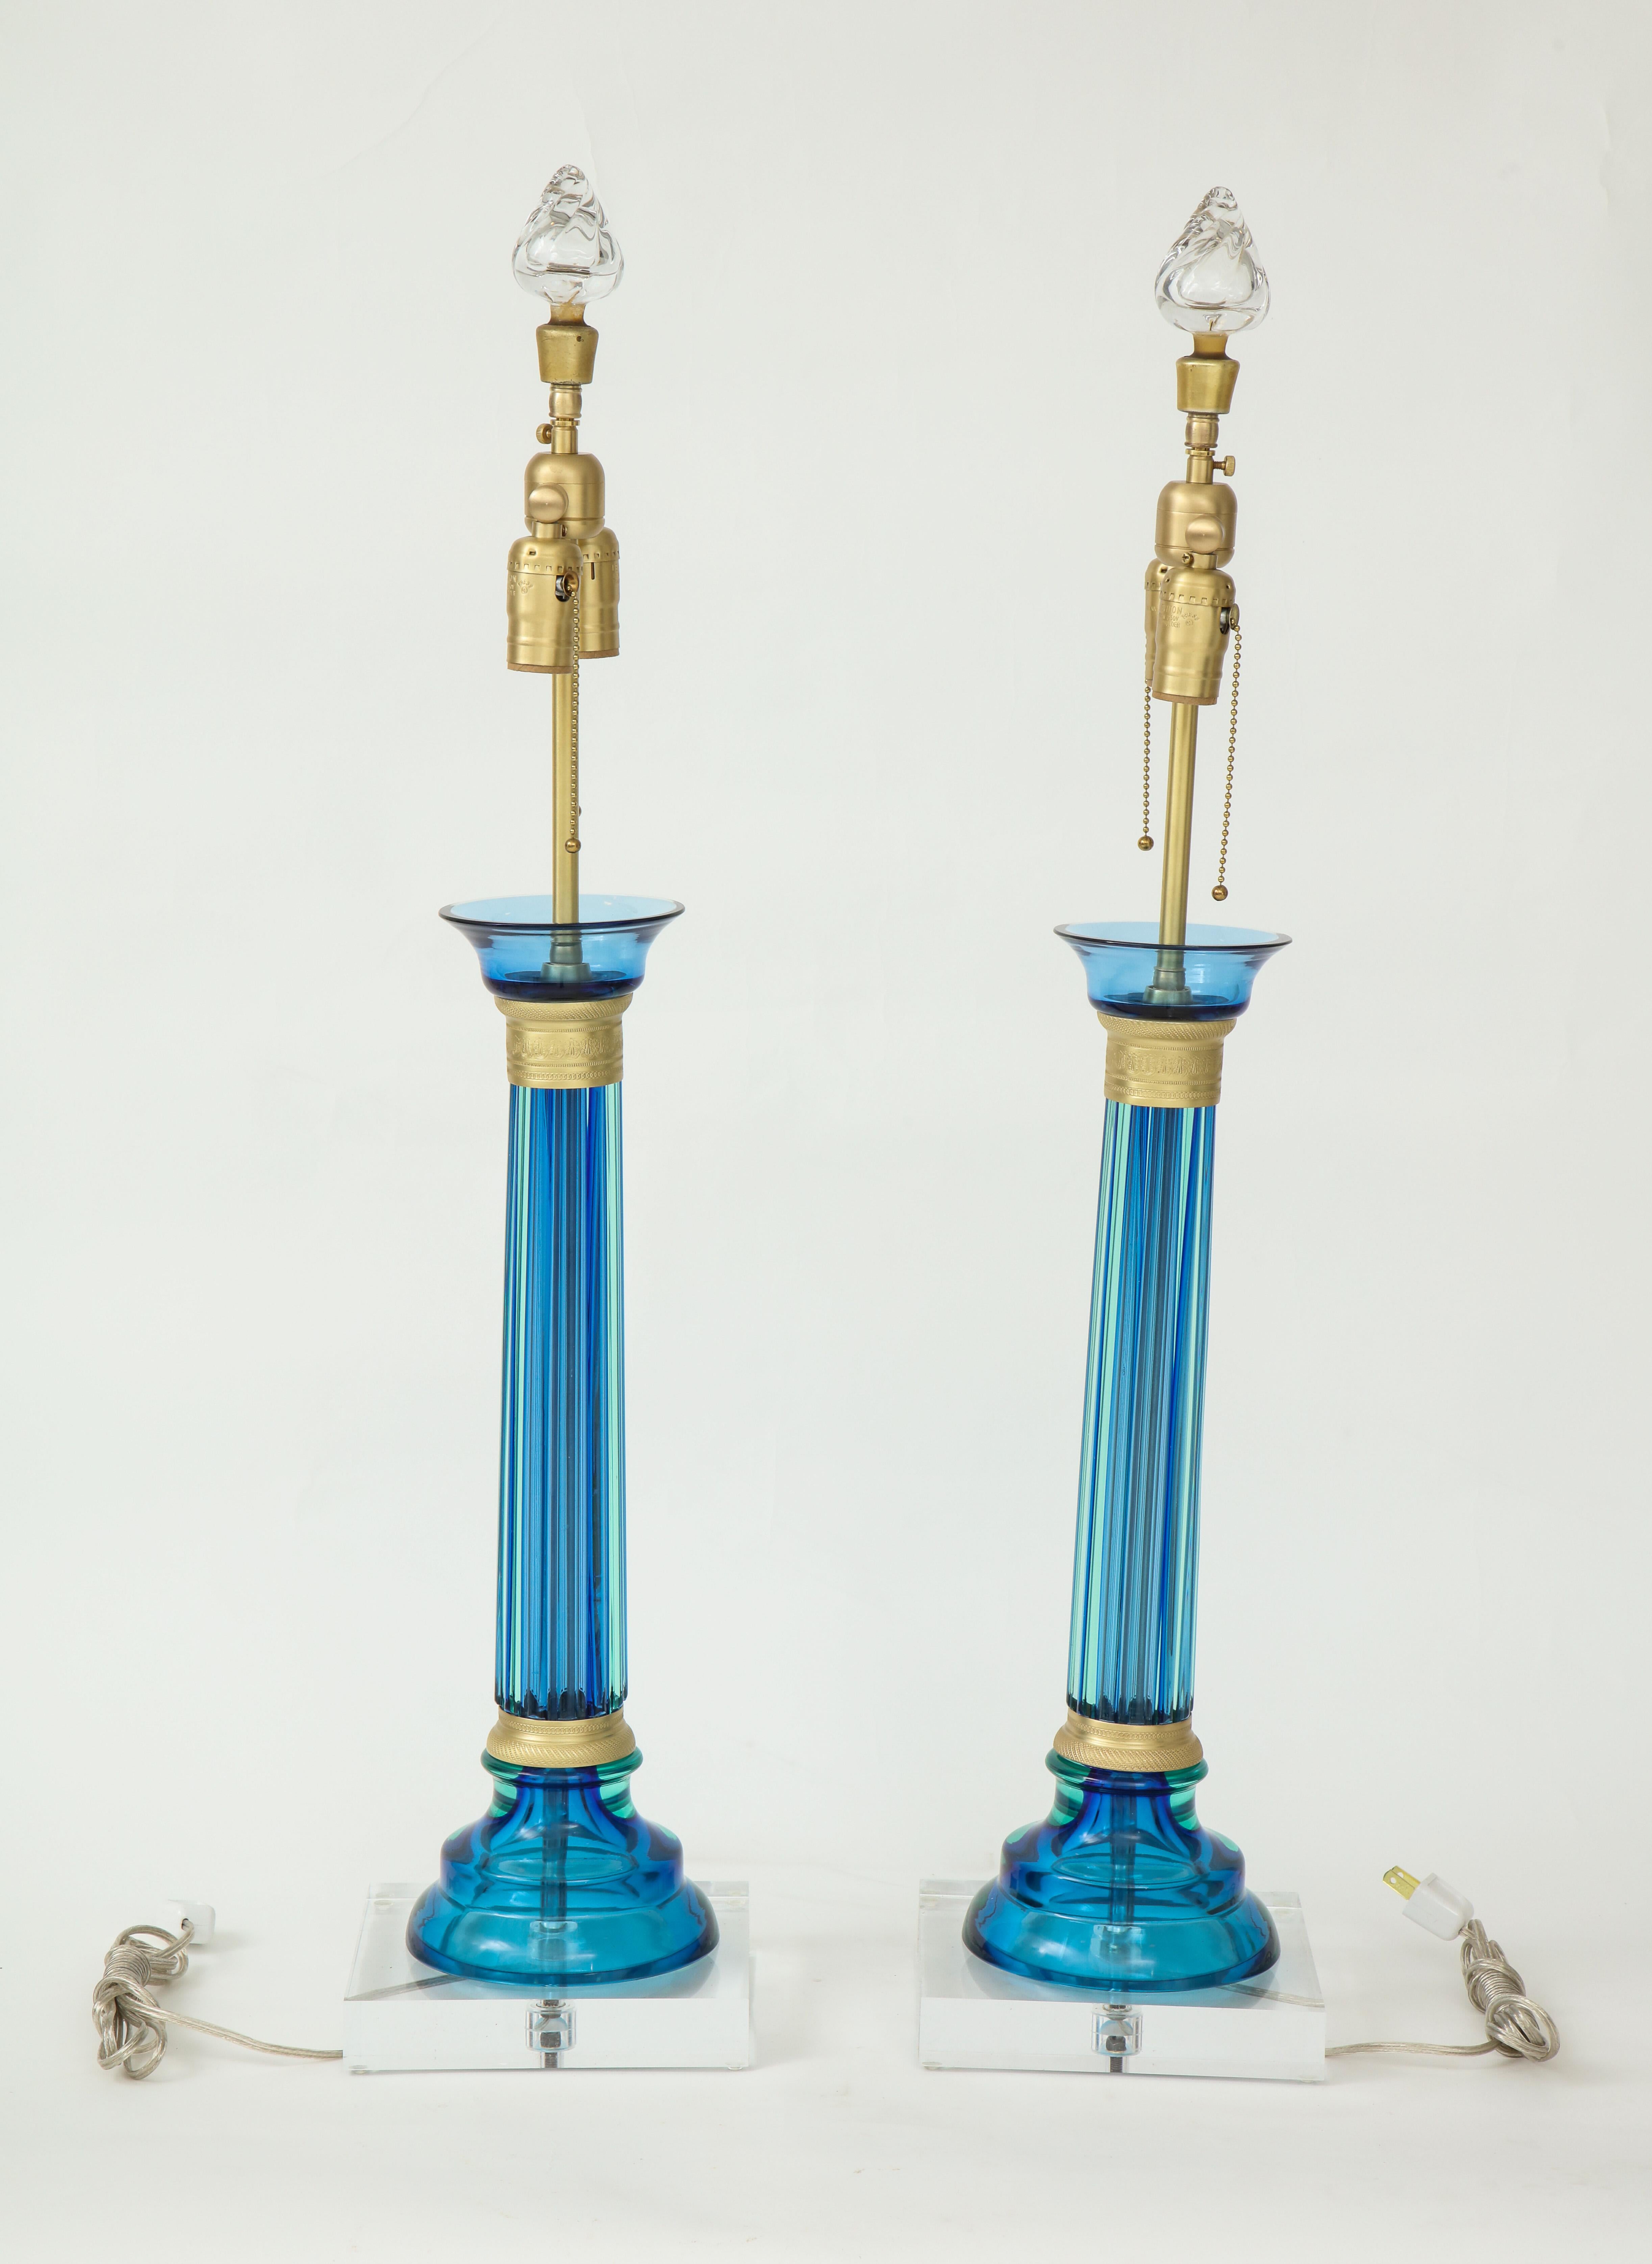 Pair of midcentury Murano glass lamps in a fresh Caribbean blue color with brass hardware and sitting on Lucite bases. Rewired for use in USA. Seguso glass for Marbro Lamp Co.